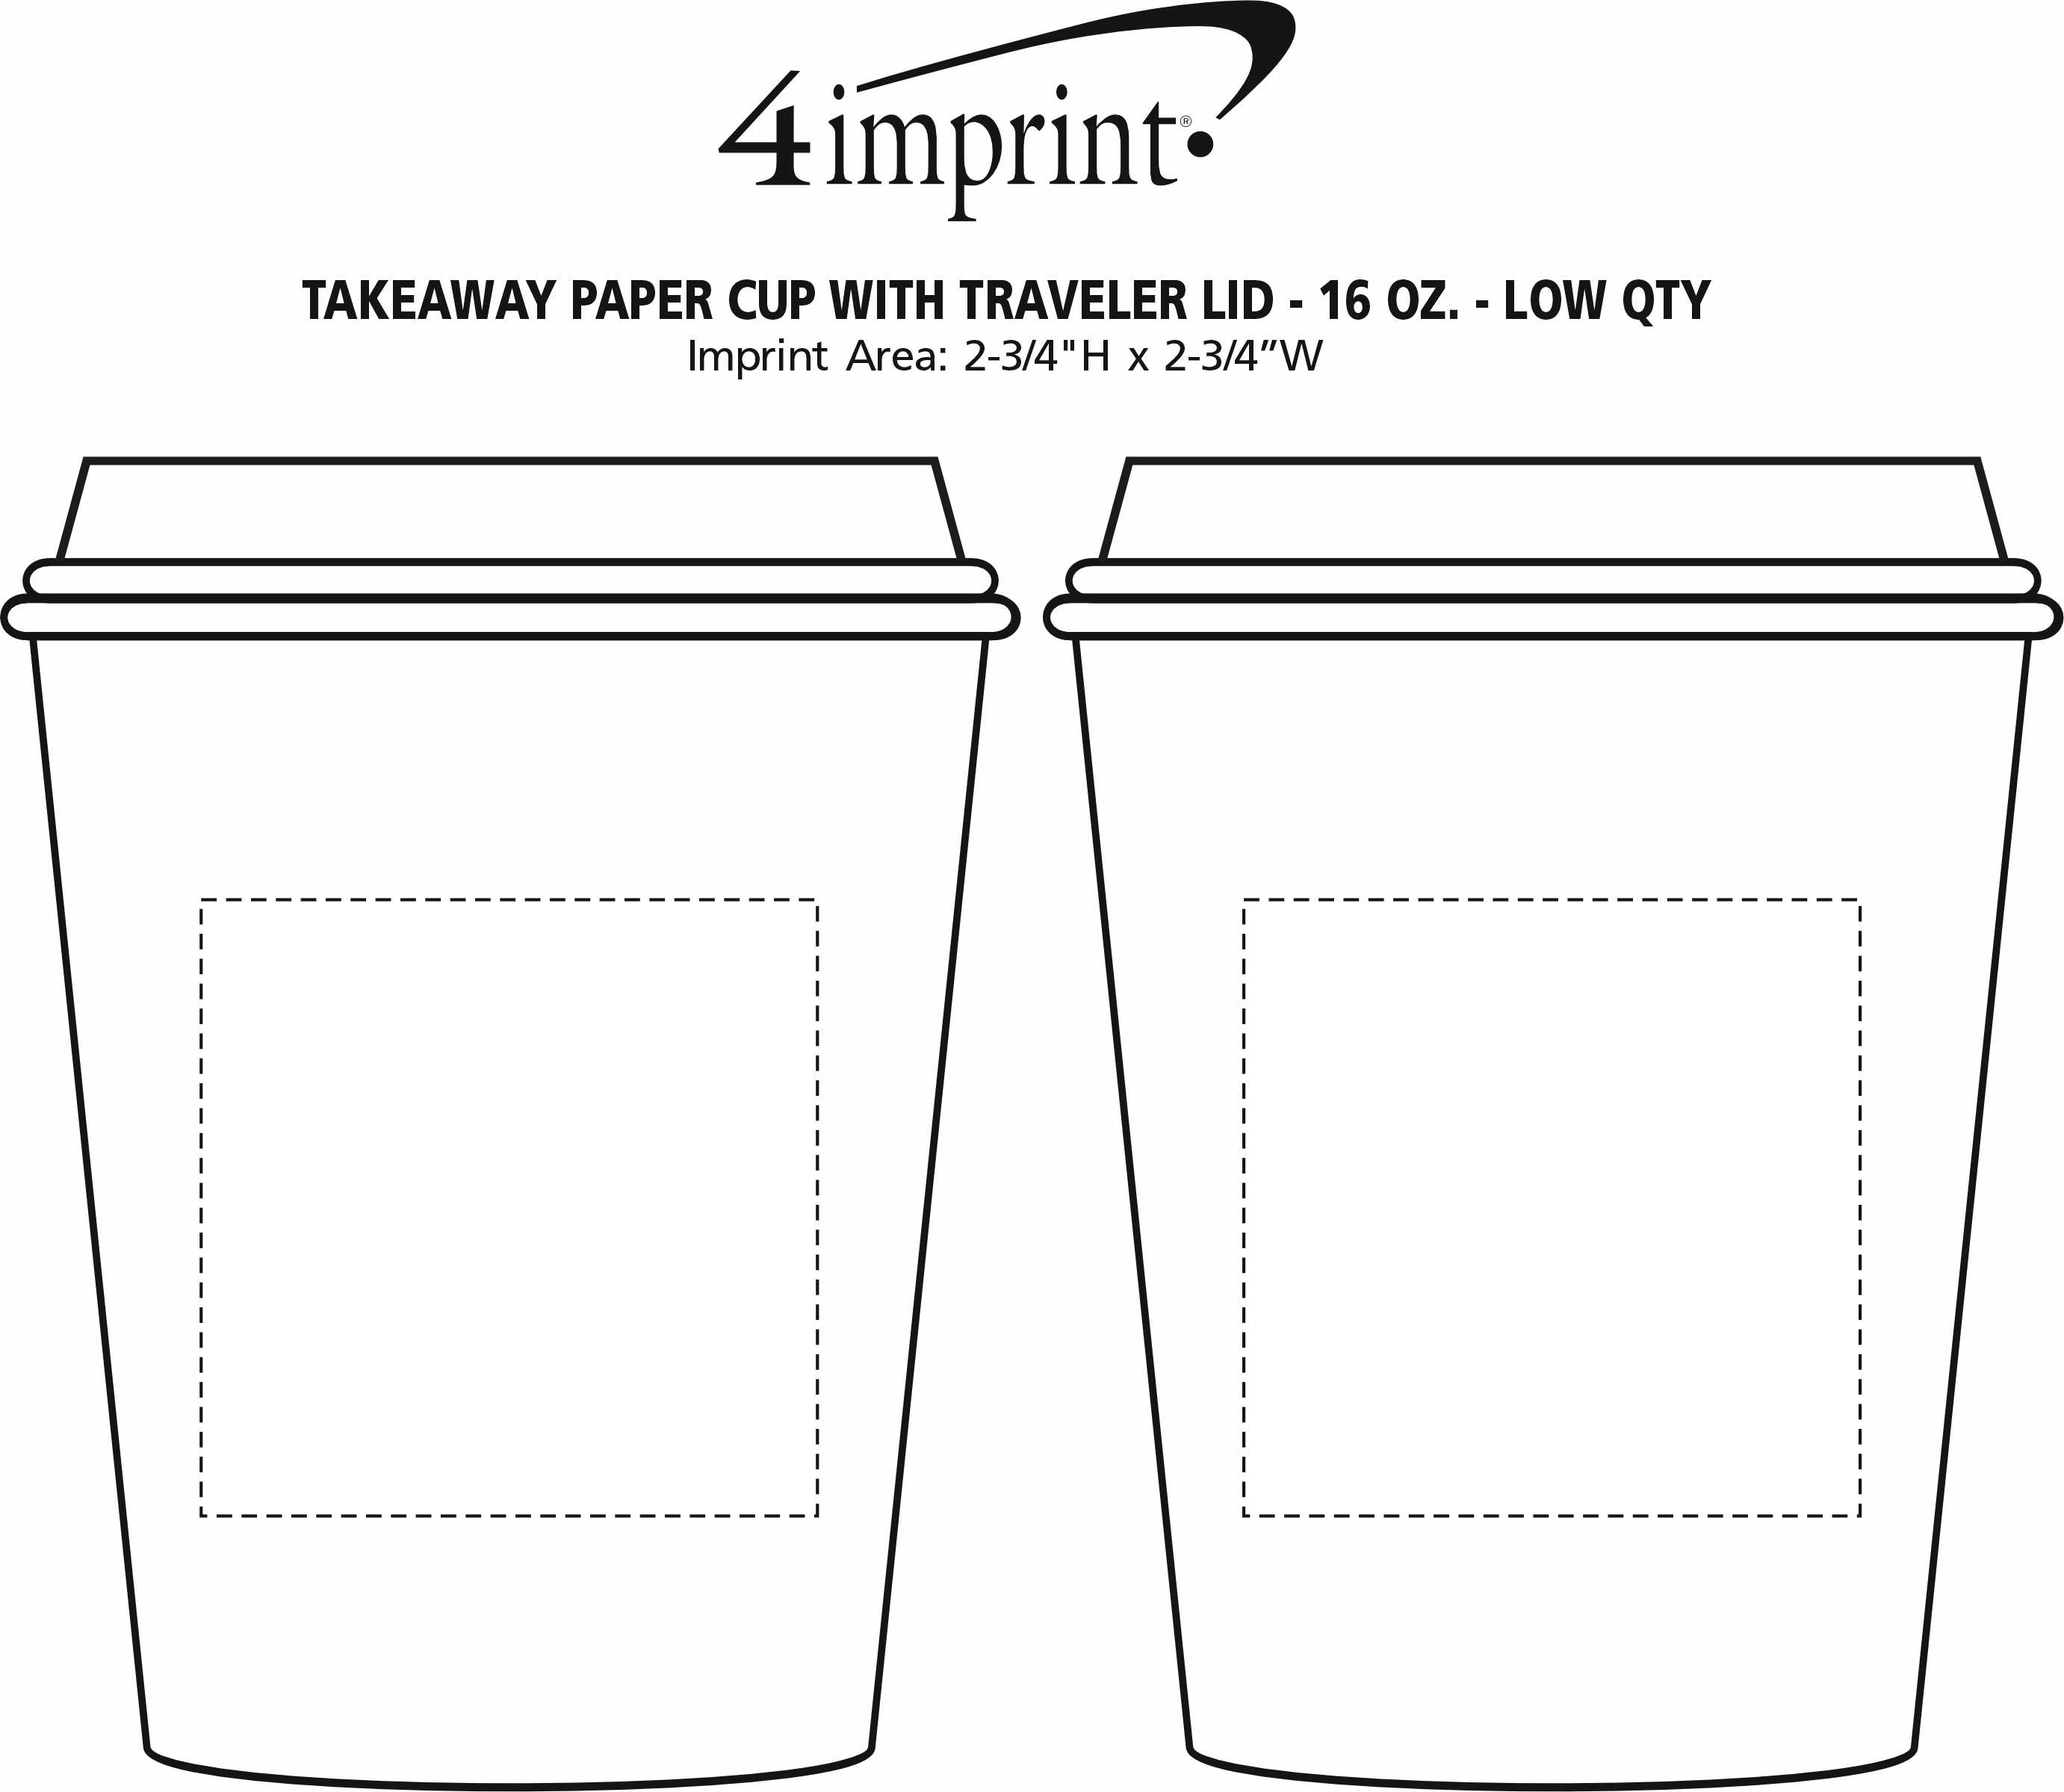 Imprint Area of Takeaway Paper Cup with Traveler Lid - 16 oz. - Low Qty